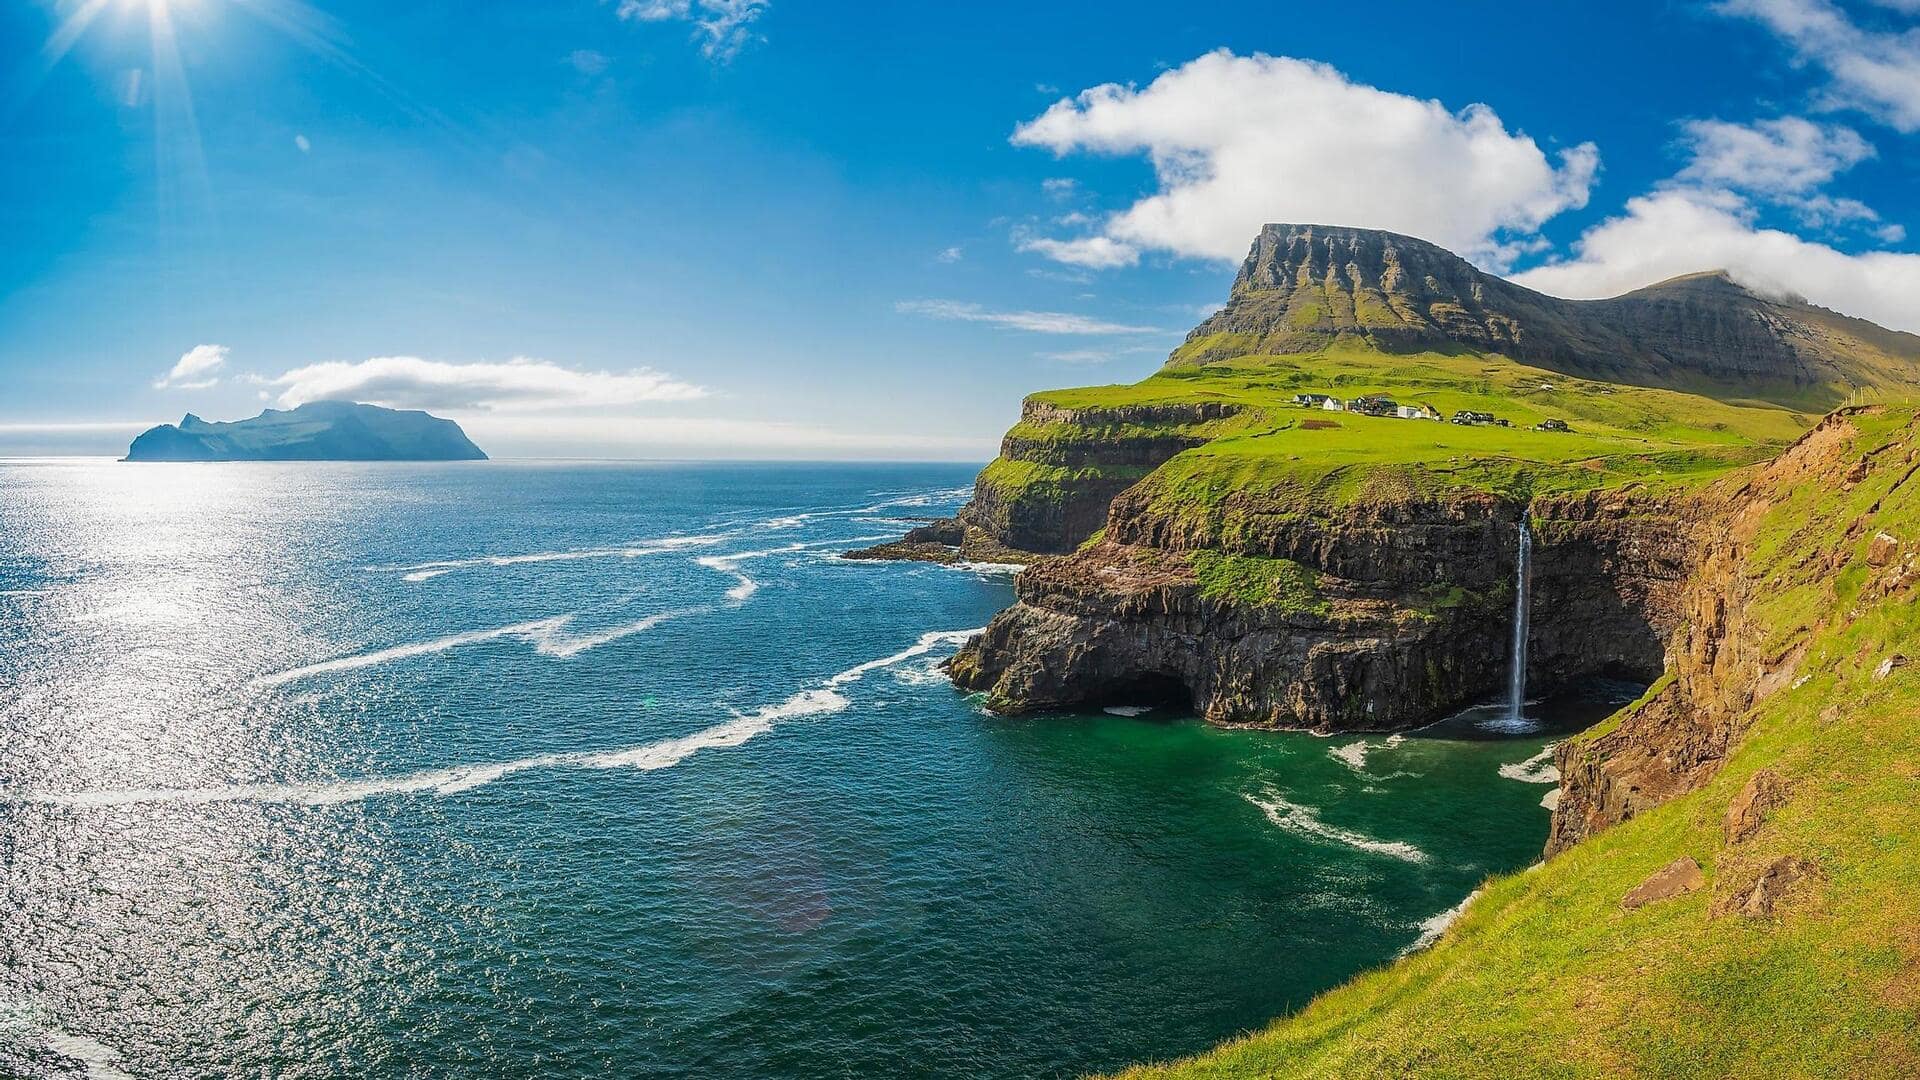 Explore the Faroe Islands, Denmark with these top travel recommendations